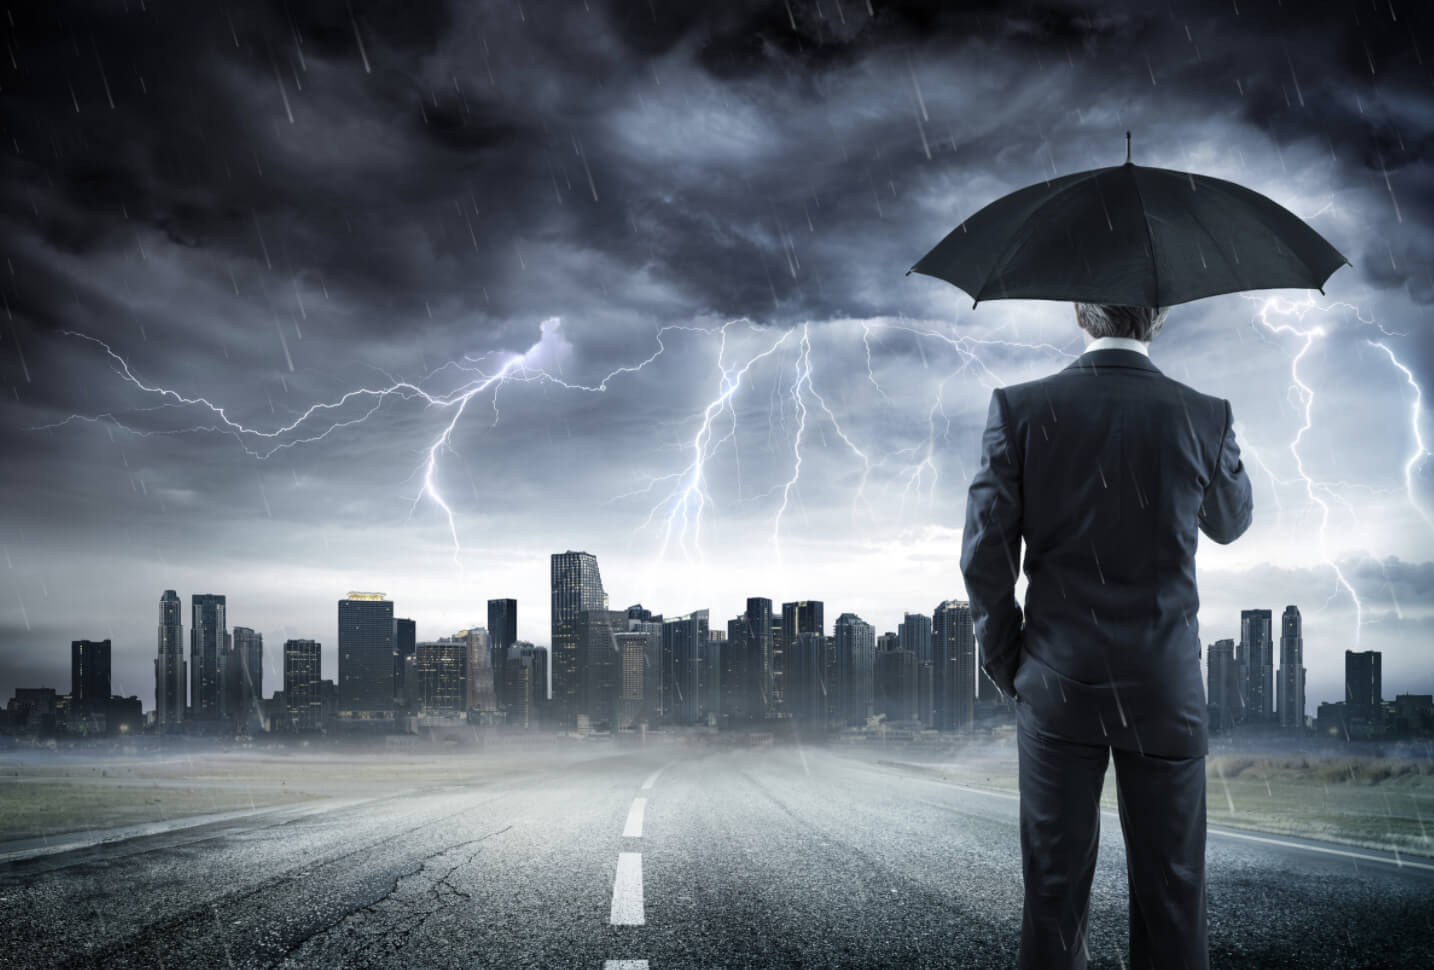 Man with umbrella overlooks a city while a thunderstorm and lightning rage around him